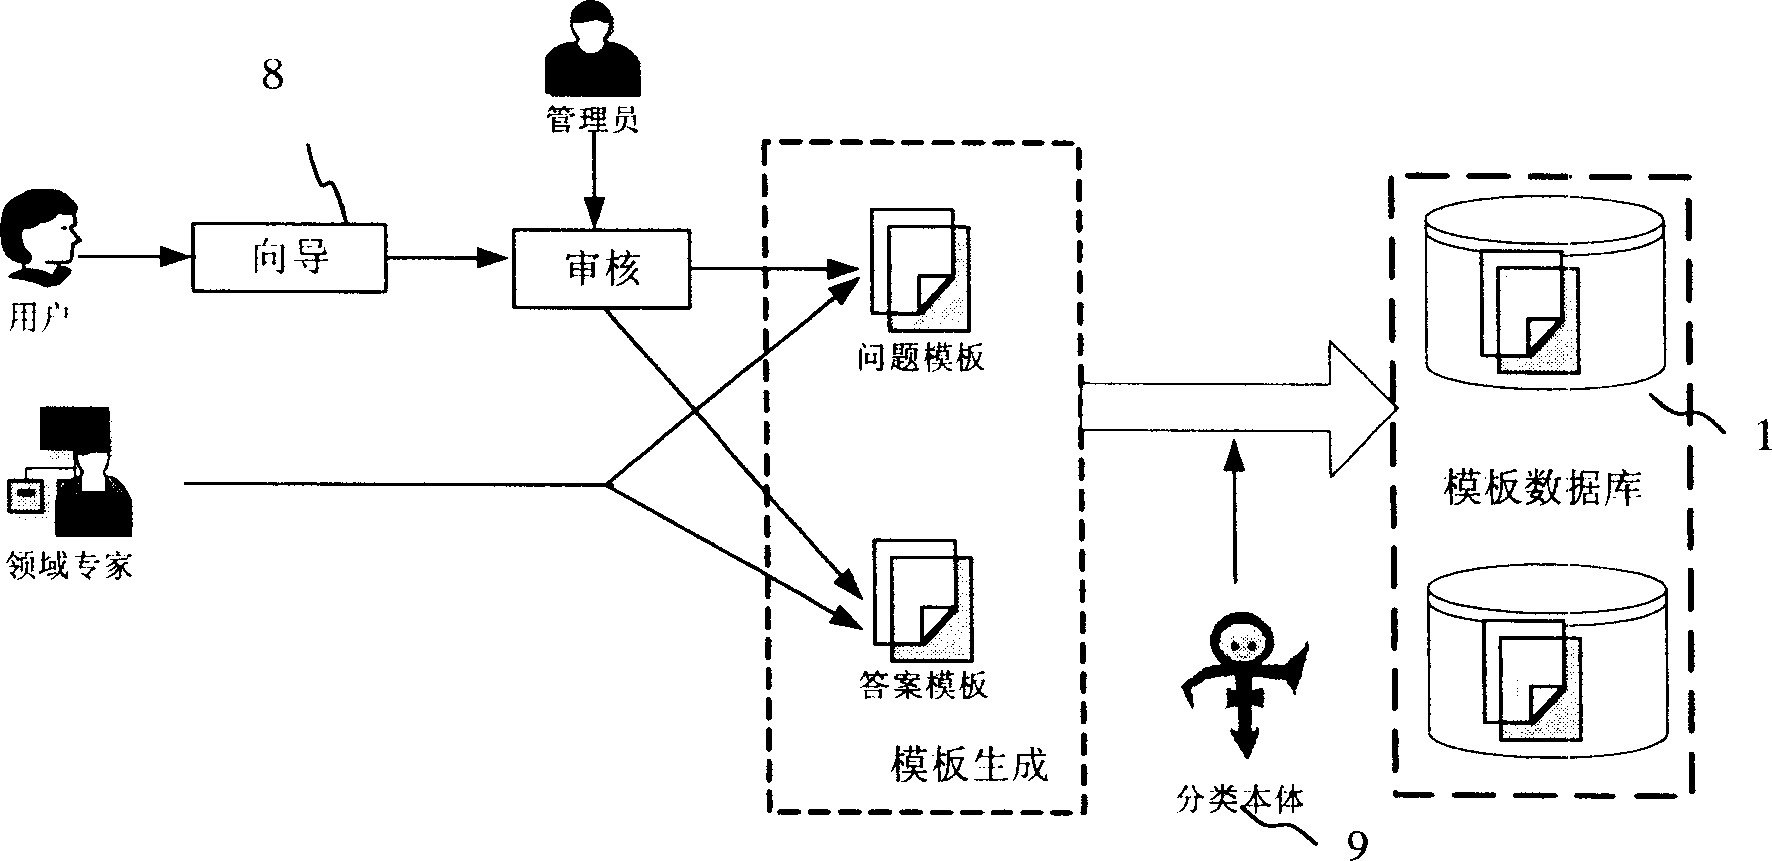 Network user interactive asking answering method and its system